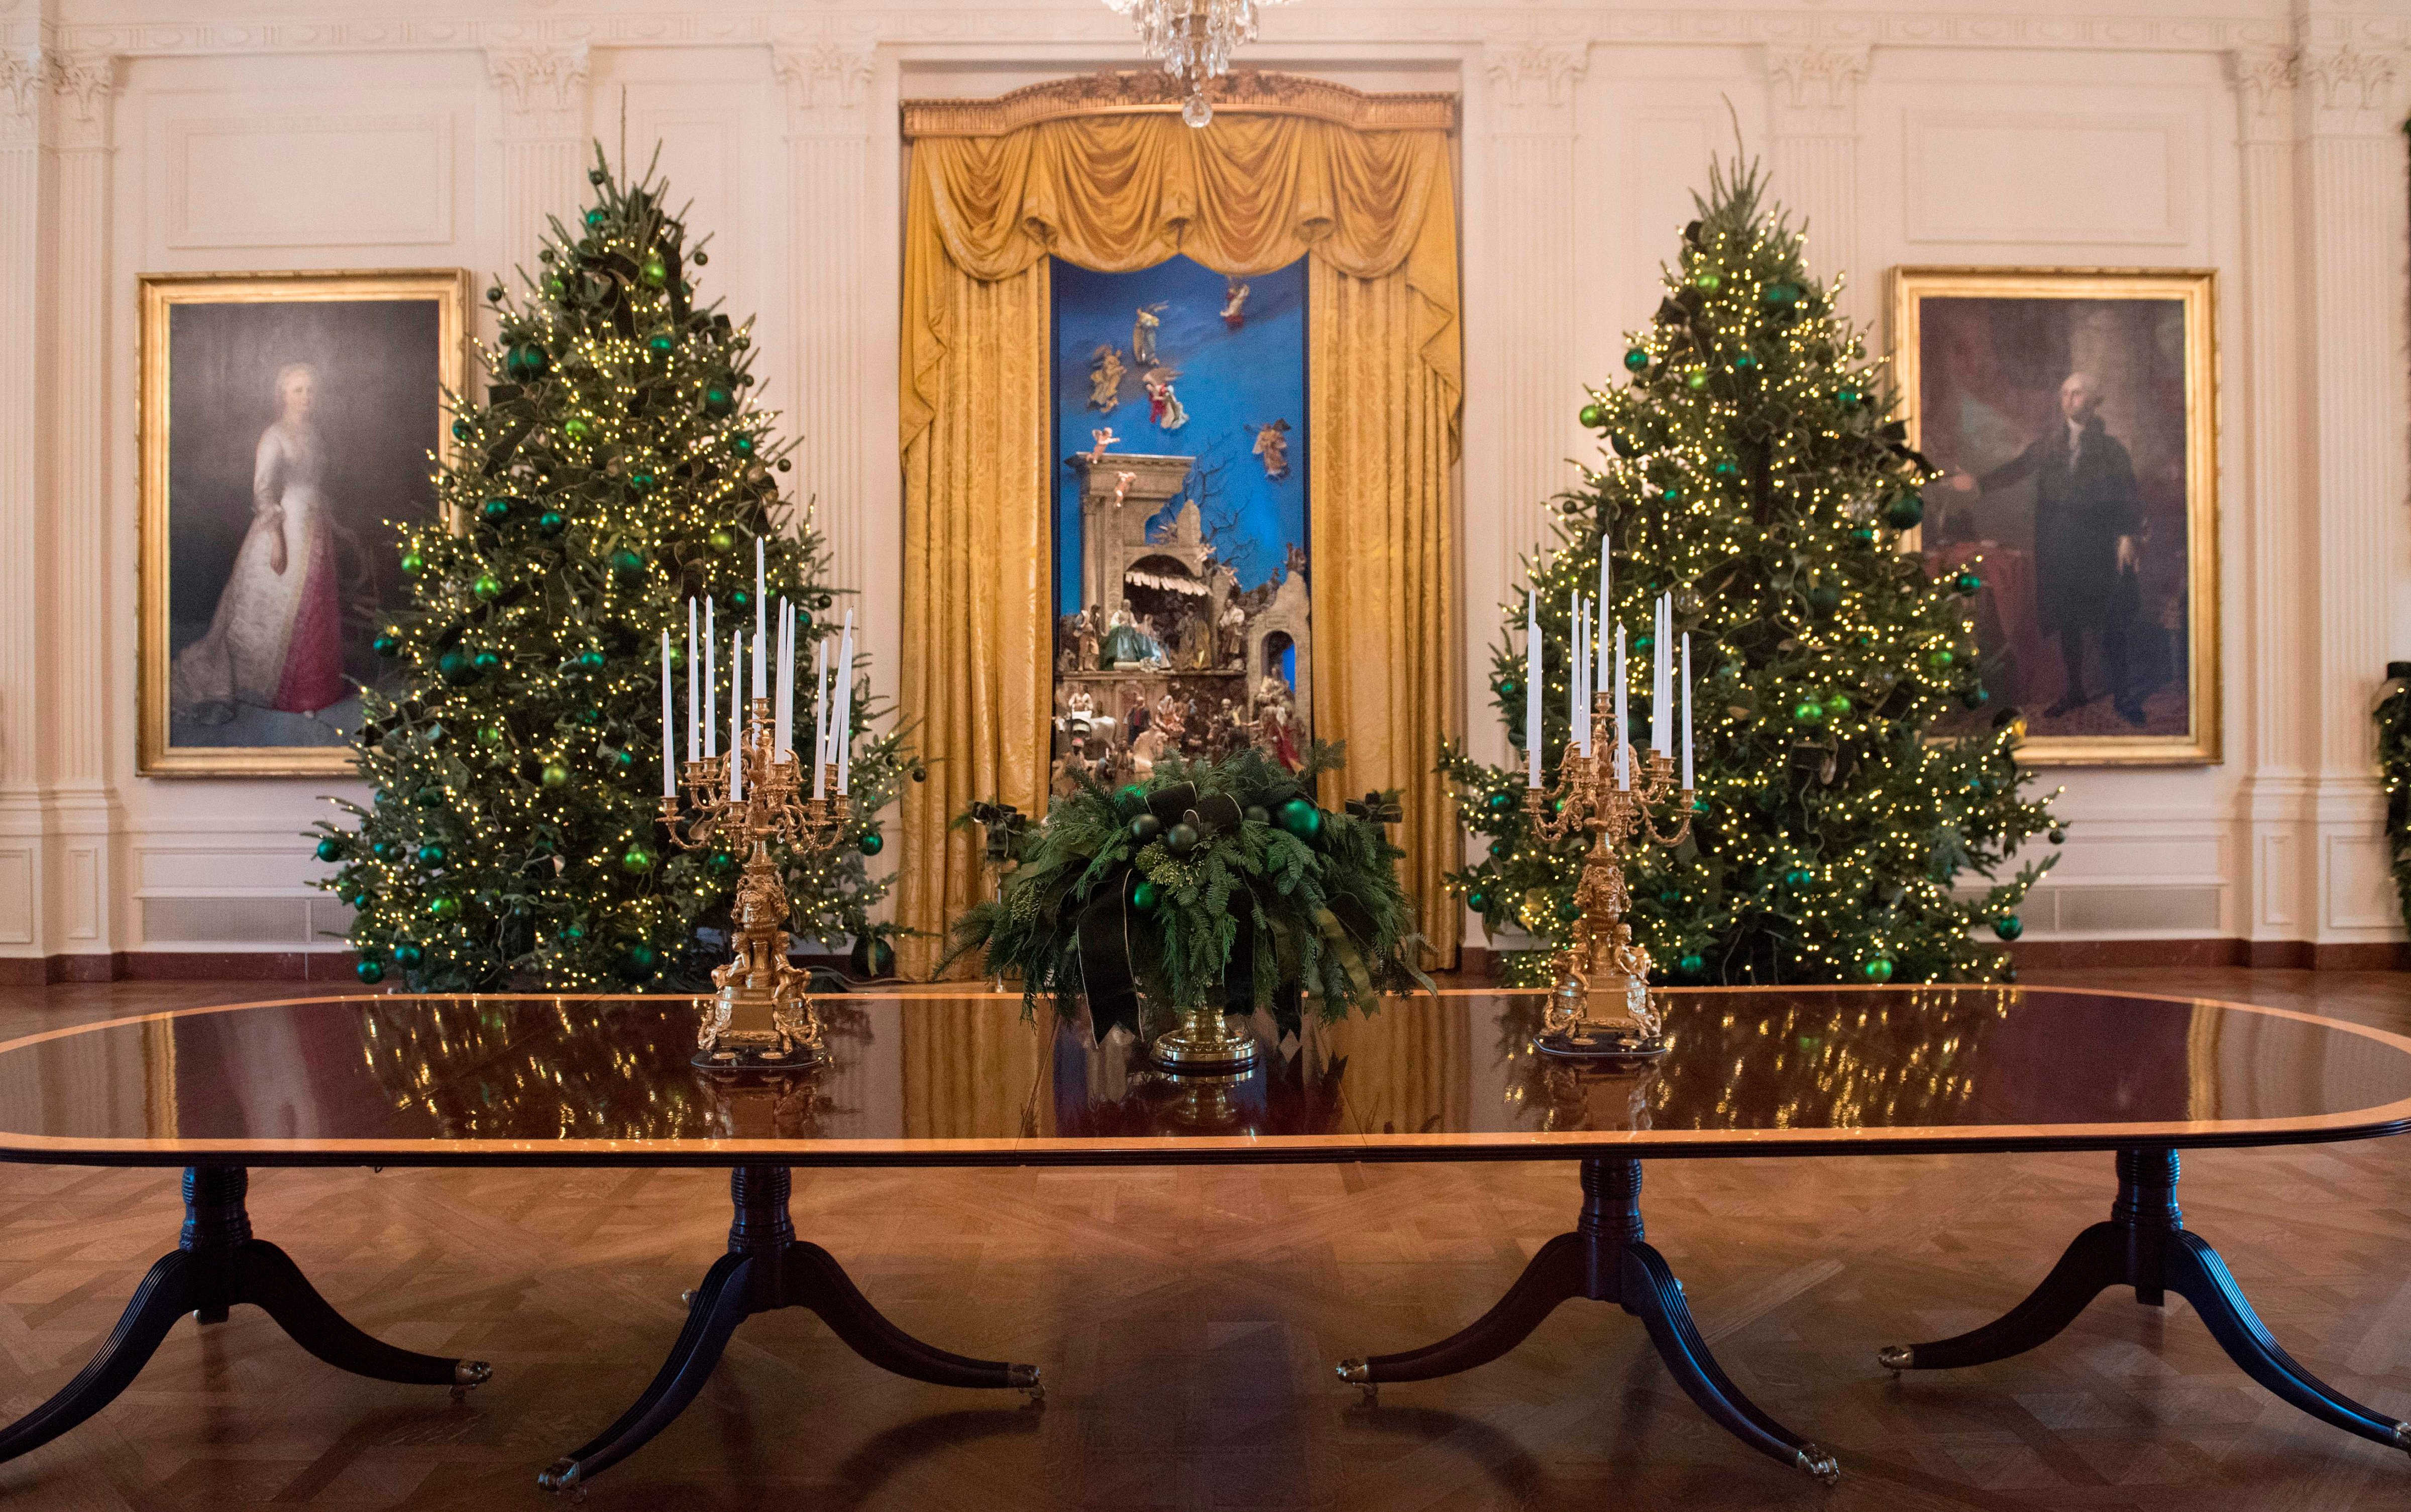 Christmas trees are seen during a preview of holiday decorations in the East Room of the White House in Washington, DC, November 27, 2017. (Saul Loeb—AFP/Getty Images)